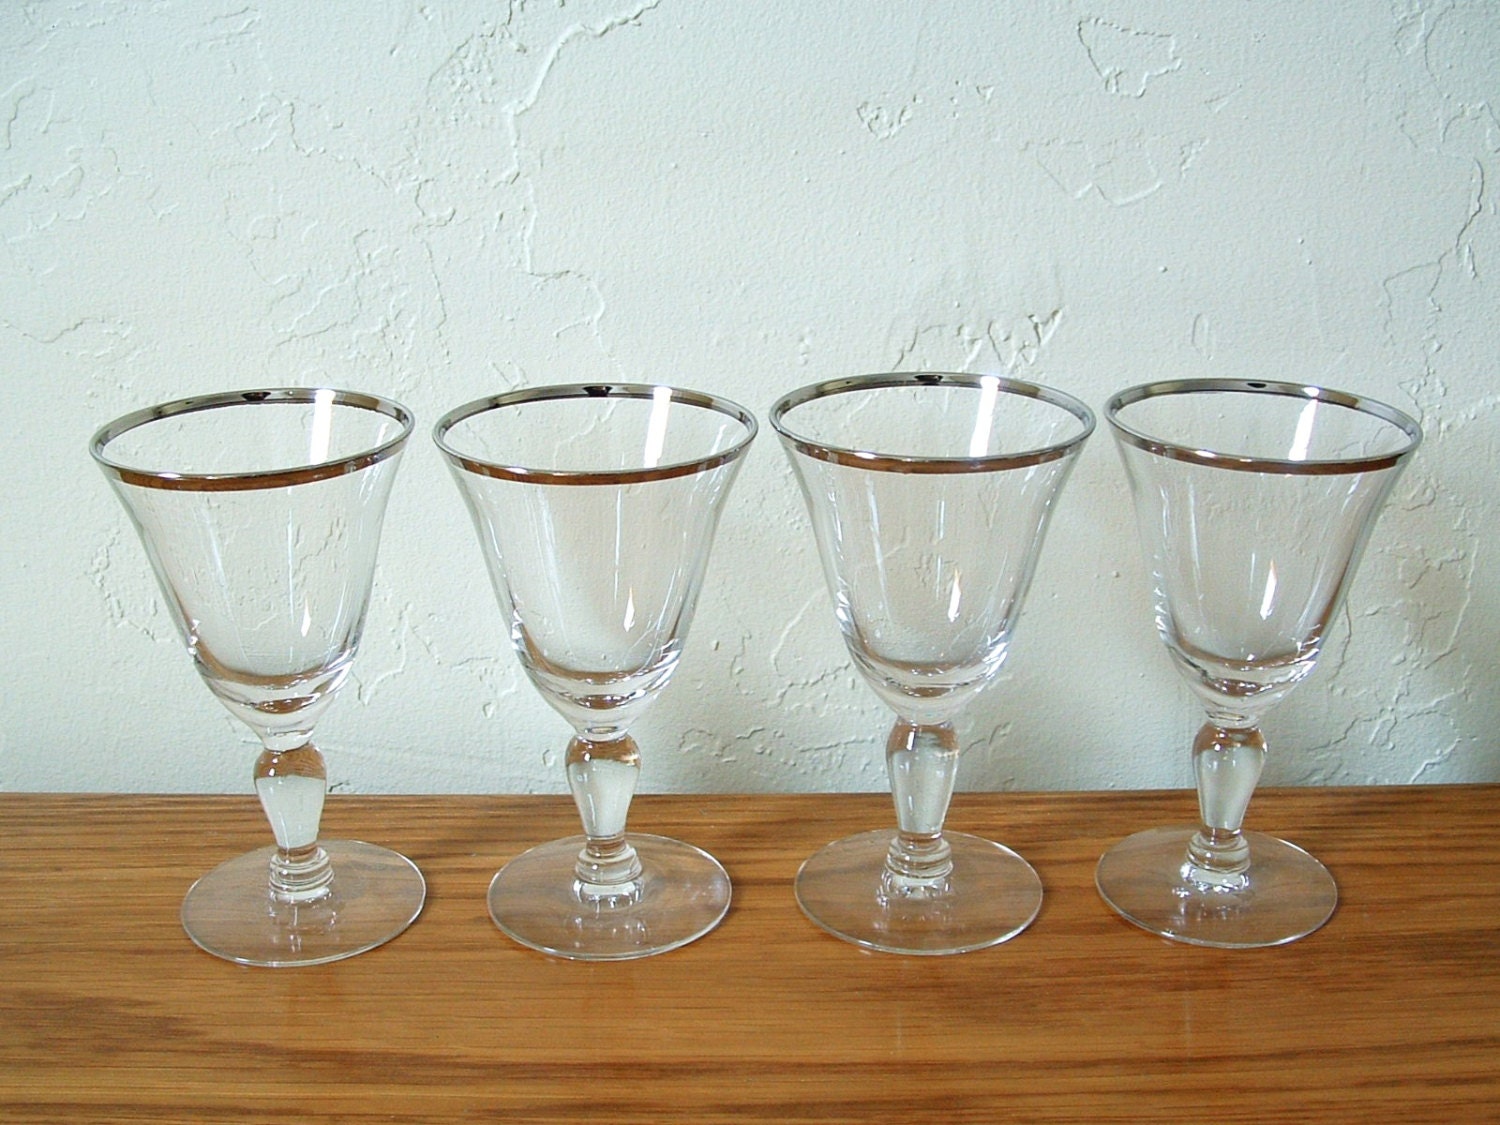 Vintage Silver Rim Wine Glasses Set Of 4 Sherry By Thefrabjousday